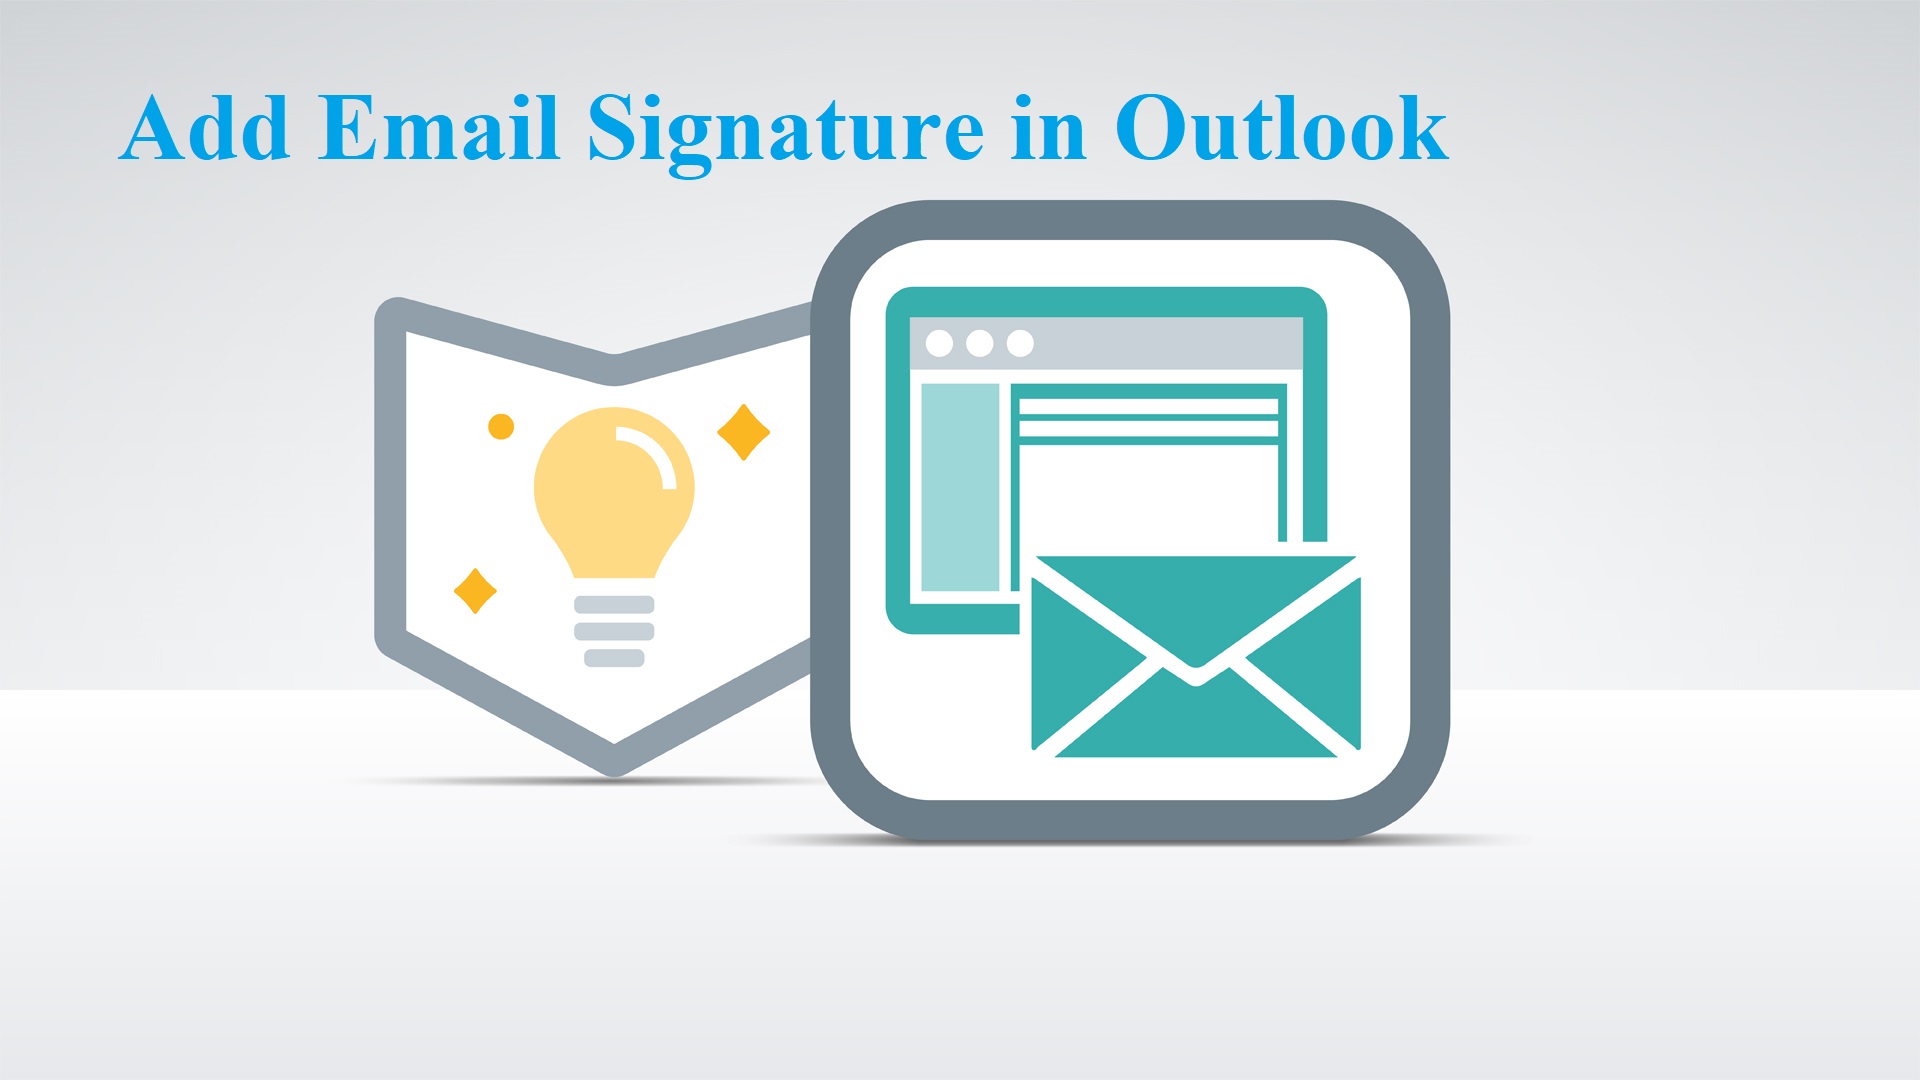 How to Add Email Signature in Outlook?